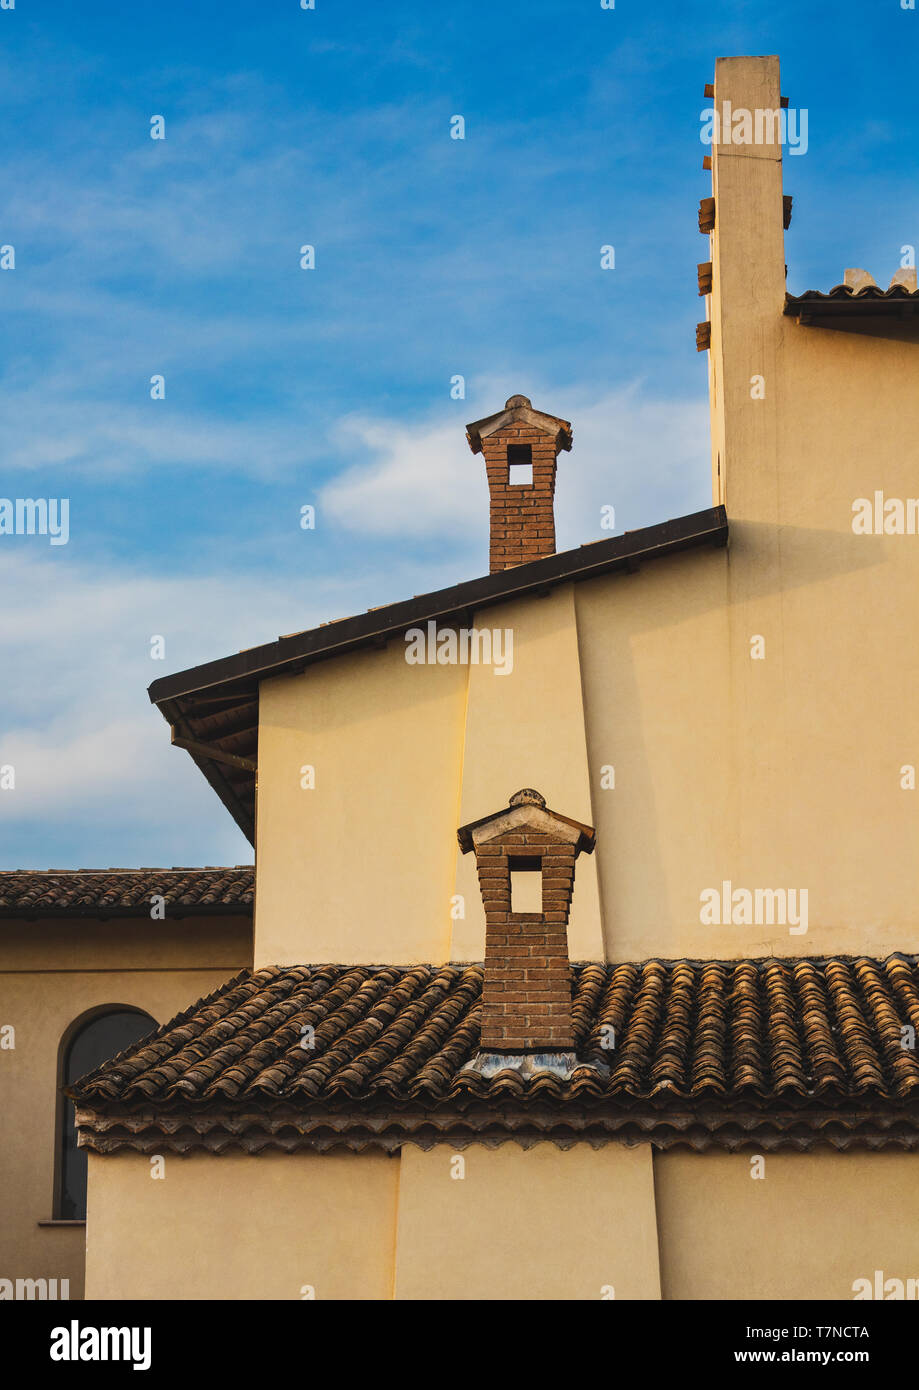 Low angle view of house facade architecture old fashione design, chimney and roof tile Stock Photo